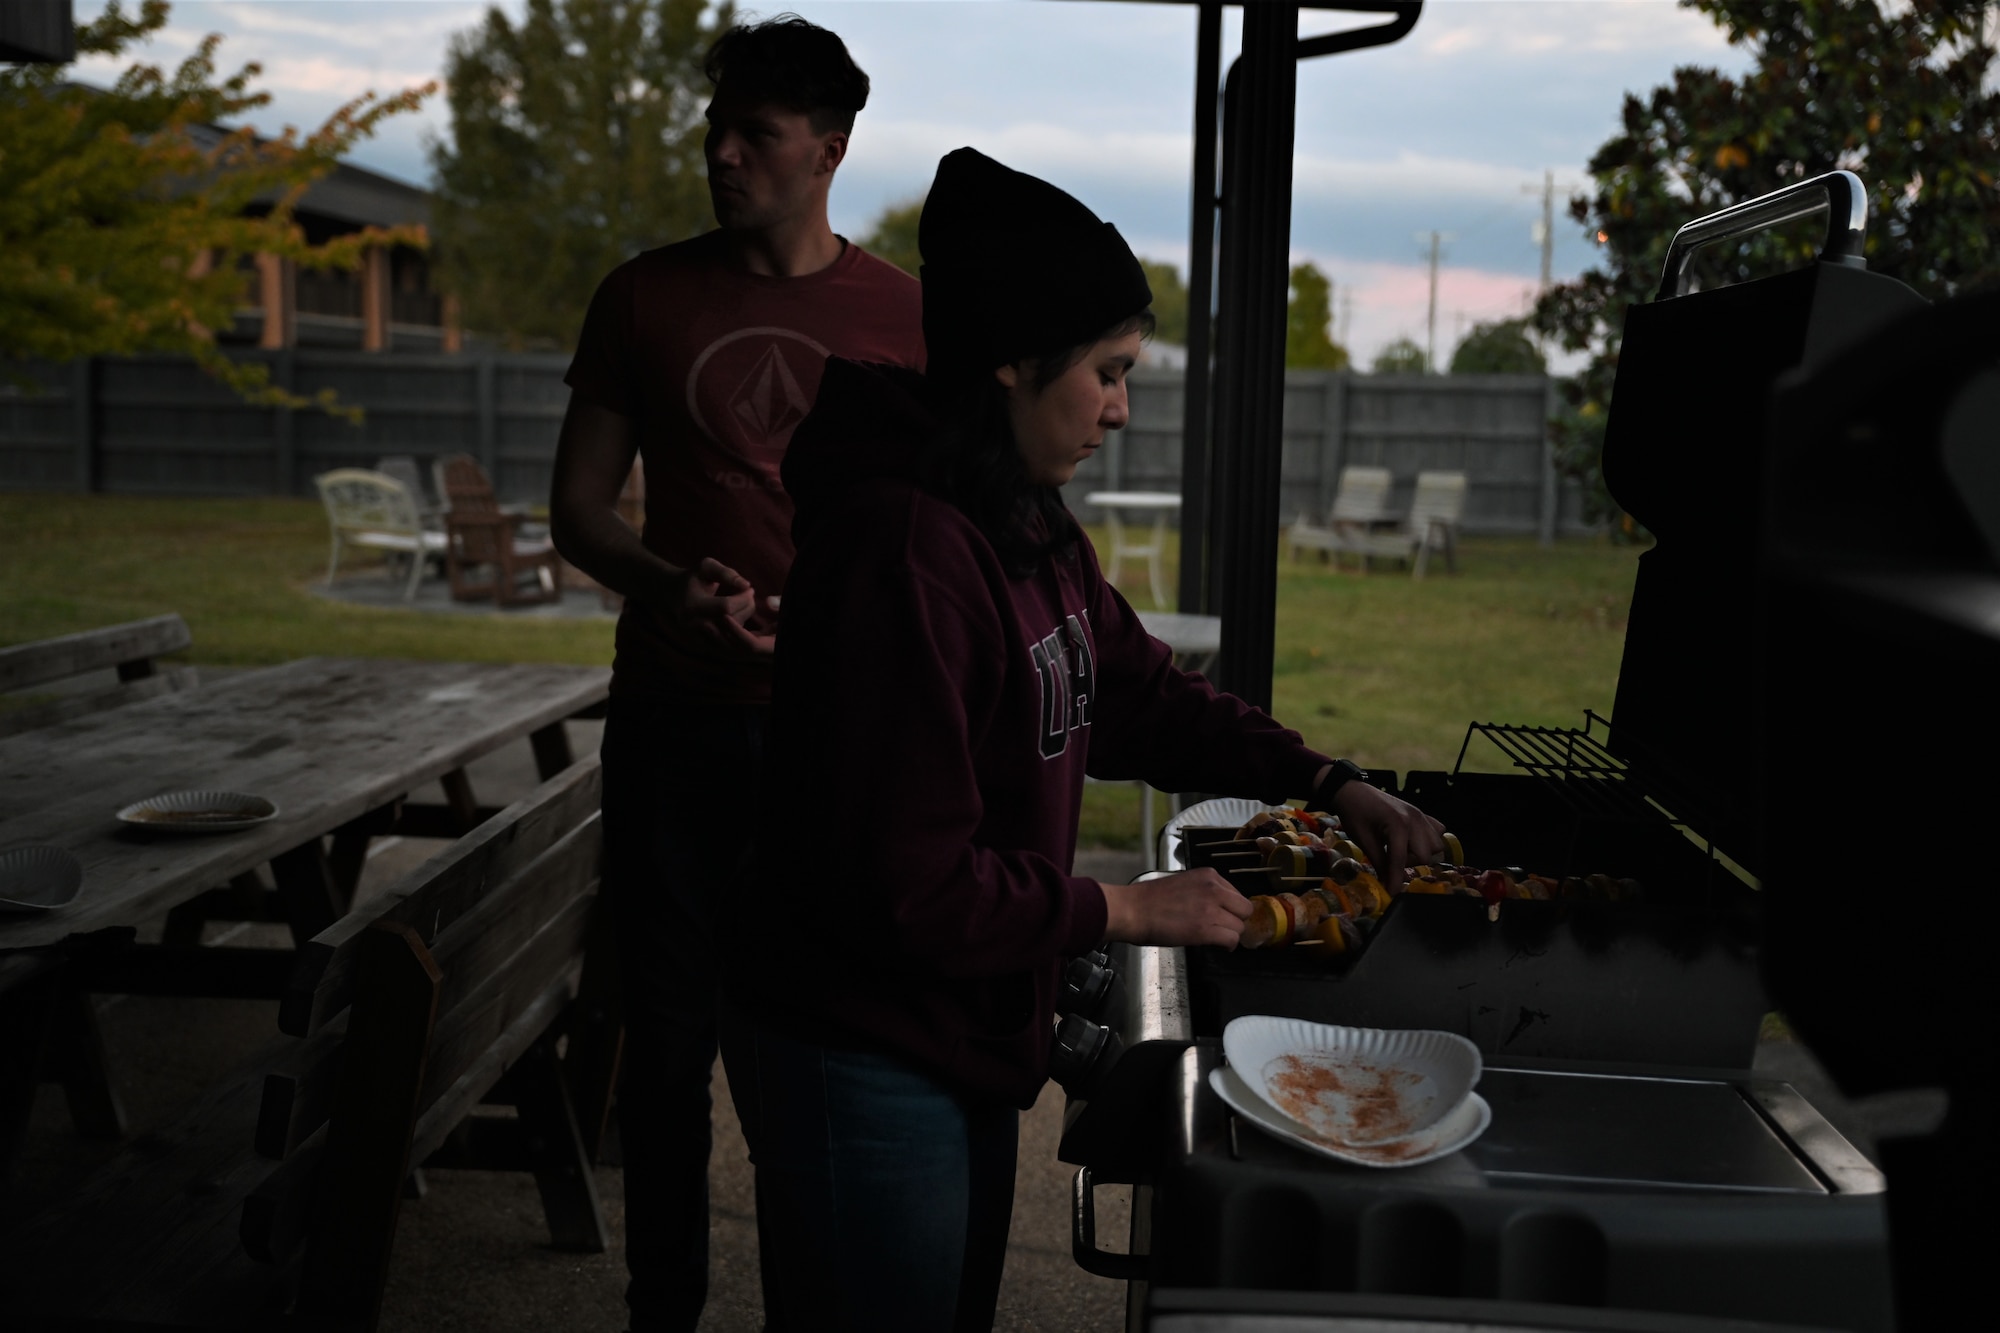 U.S. Air Force Airman 1st Class Evelyn Maryorquin, 48th Flying Training Squadron Aviation Resource Management apprentice, places a kabob on the grill, during a cooking class, Nov. 5, 2021, on Columbus Air Force Base, Miss. The class was a part of a cooking series for Airmen to get the chance to learn how to cook varies foods. (U.S. Air Force photo by Airman 1st Class Jessica Haynie)